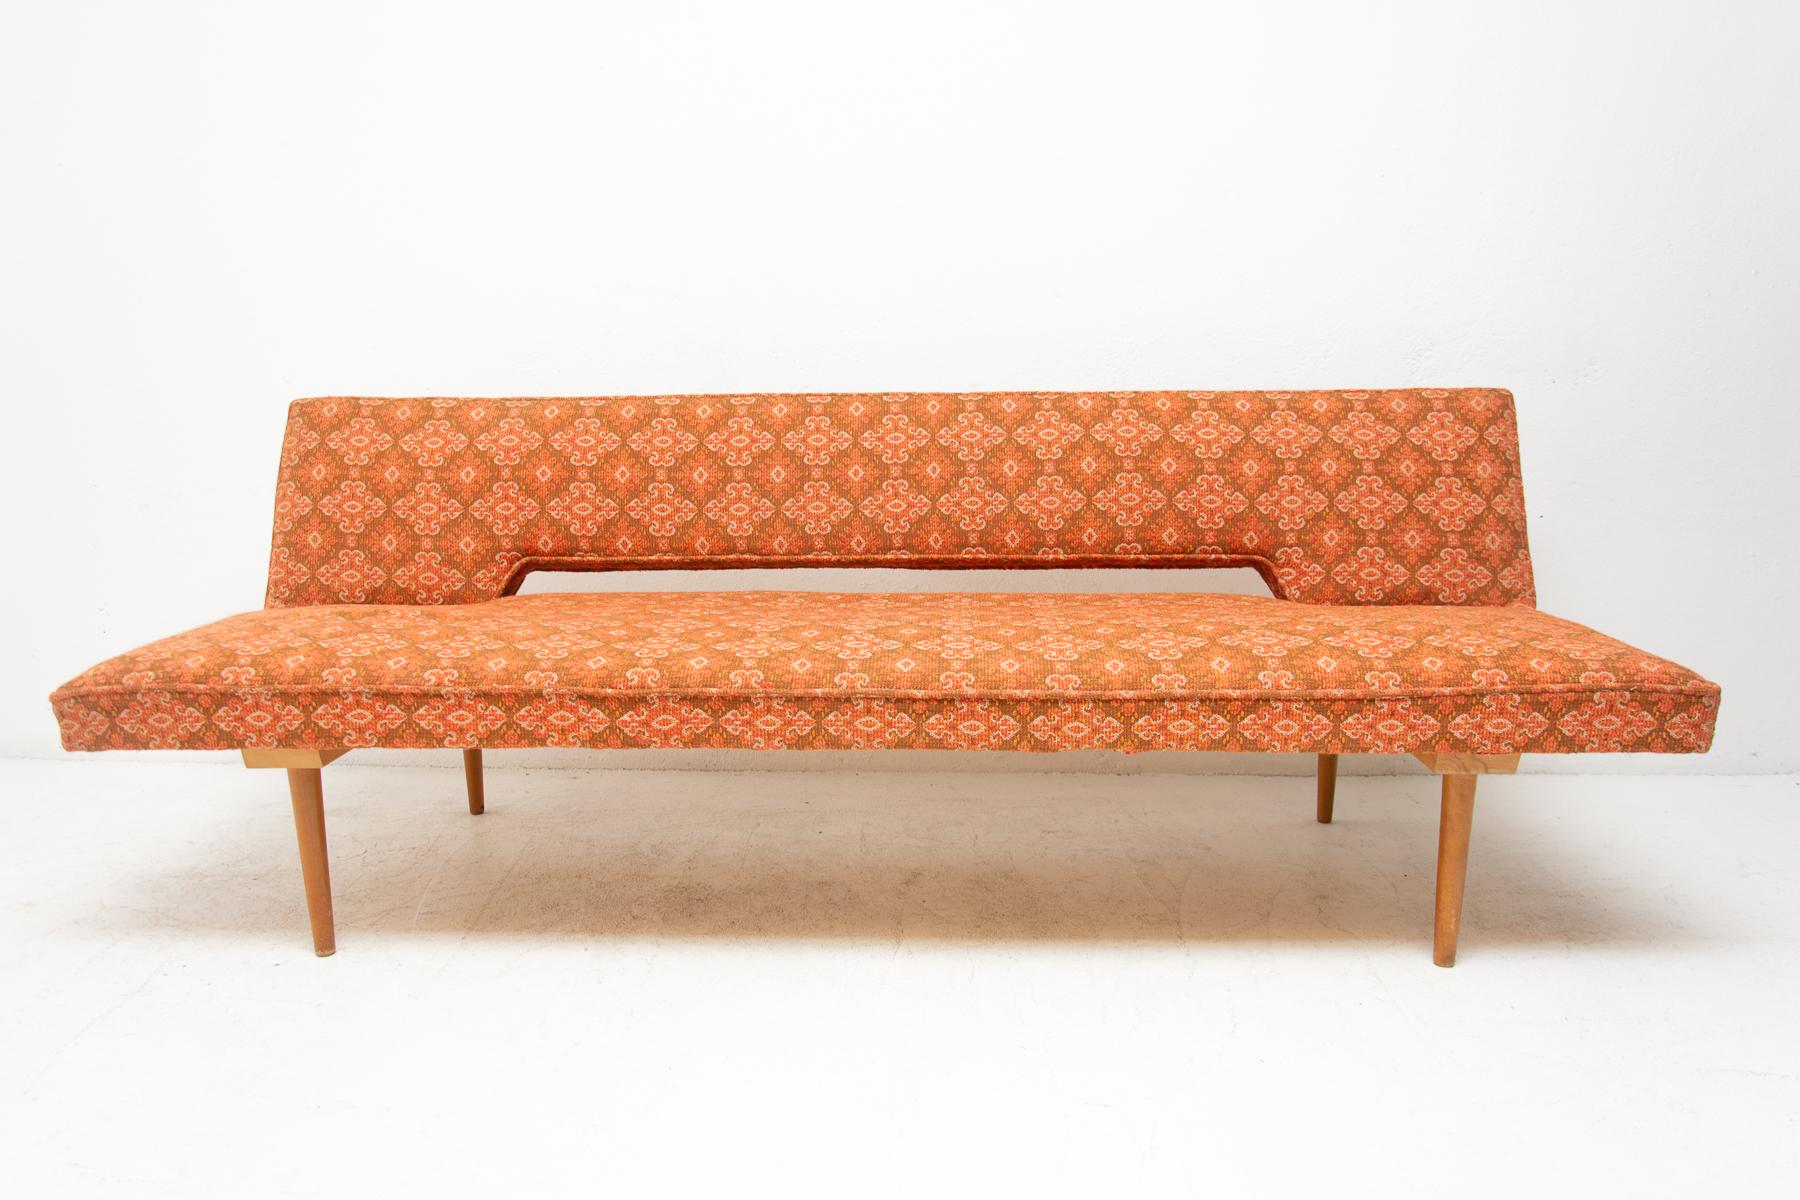 Midcentury adjustable sofa-bench designed by the Czech famous designer Miroslav Navrátil in the 1960s. Made in Czechoslovakia. It features very attractive and simple design. Material: fabric, beechwood. It’s a typical example of Czechoslovak design